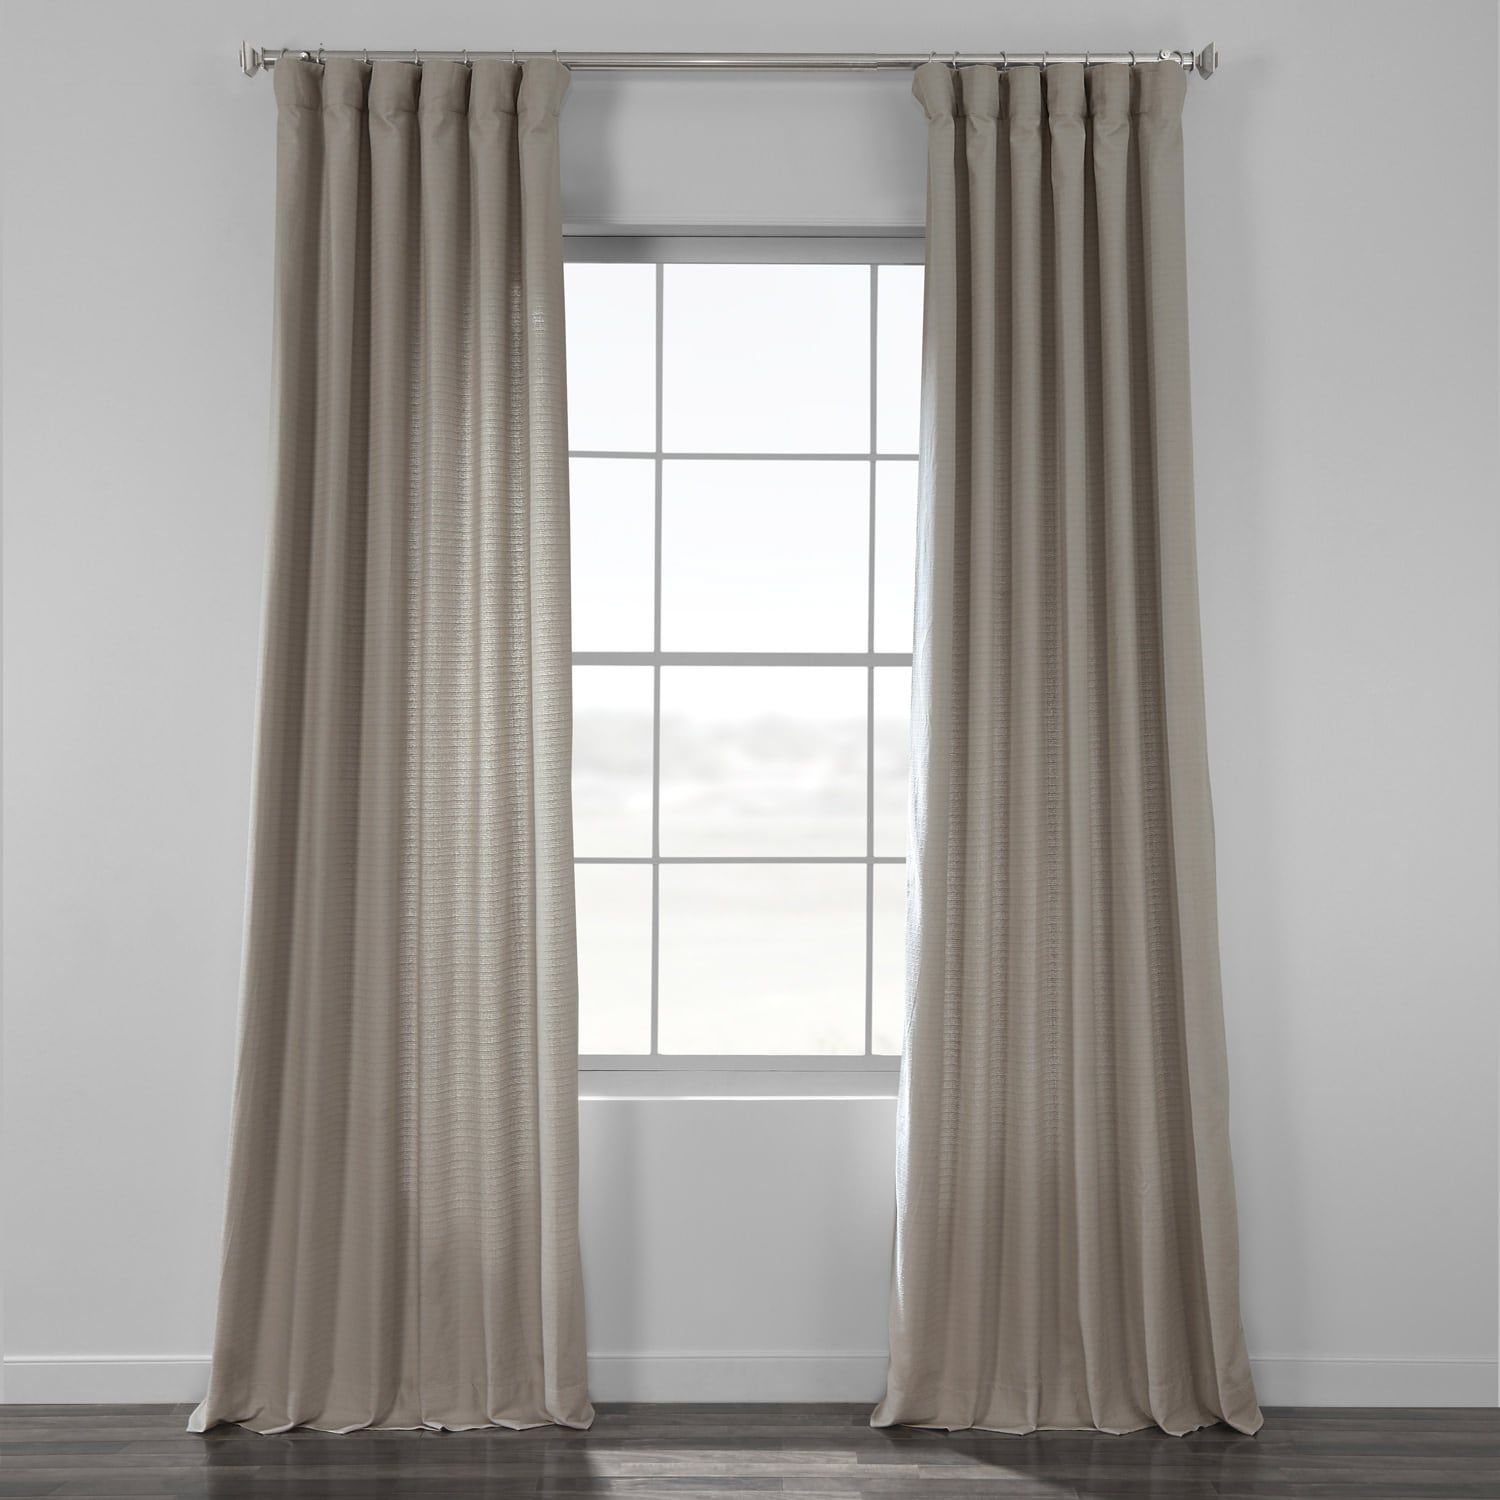 Stardust Grey Bark Weave Solid Cotton Curtain Pertaining To Bark Weave Solid Cotton Curtains (View 2 of 20)